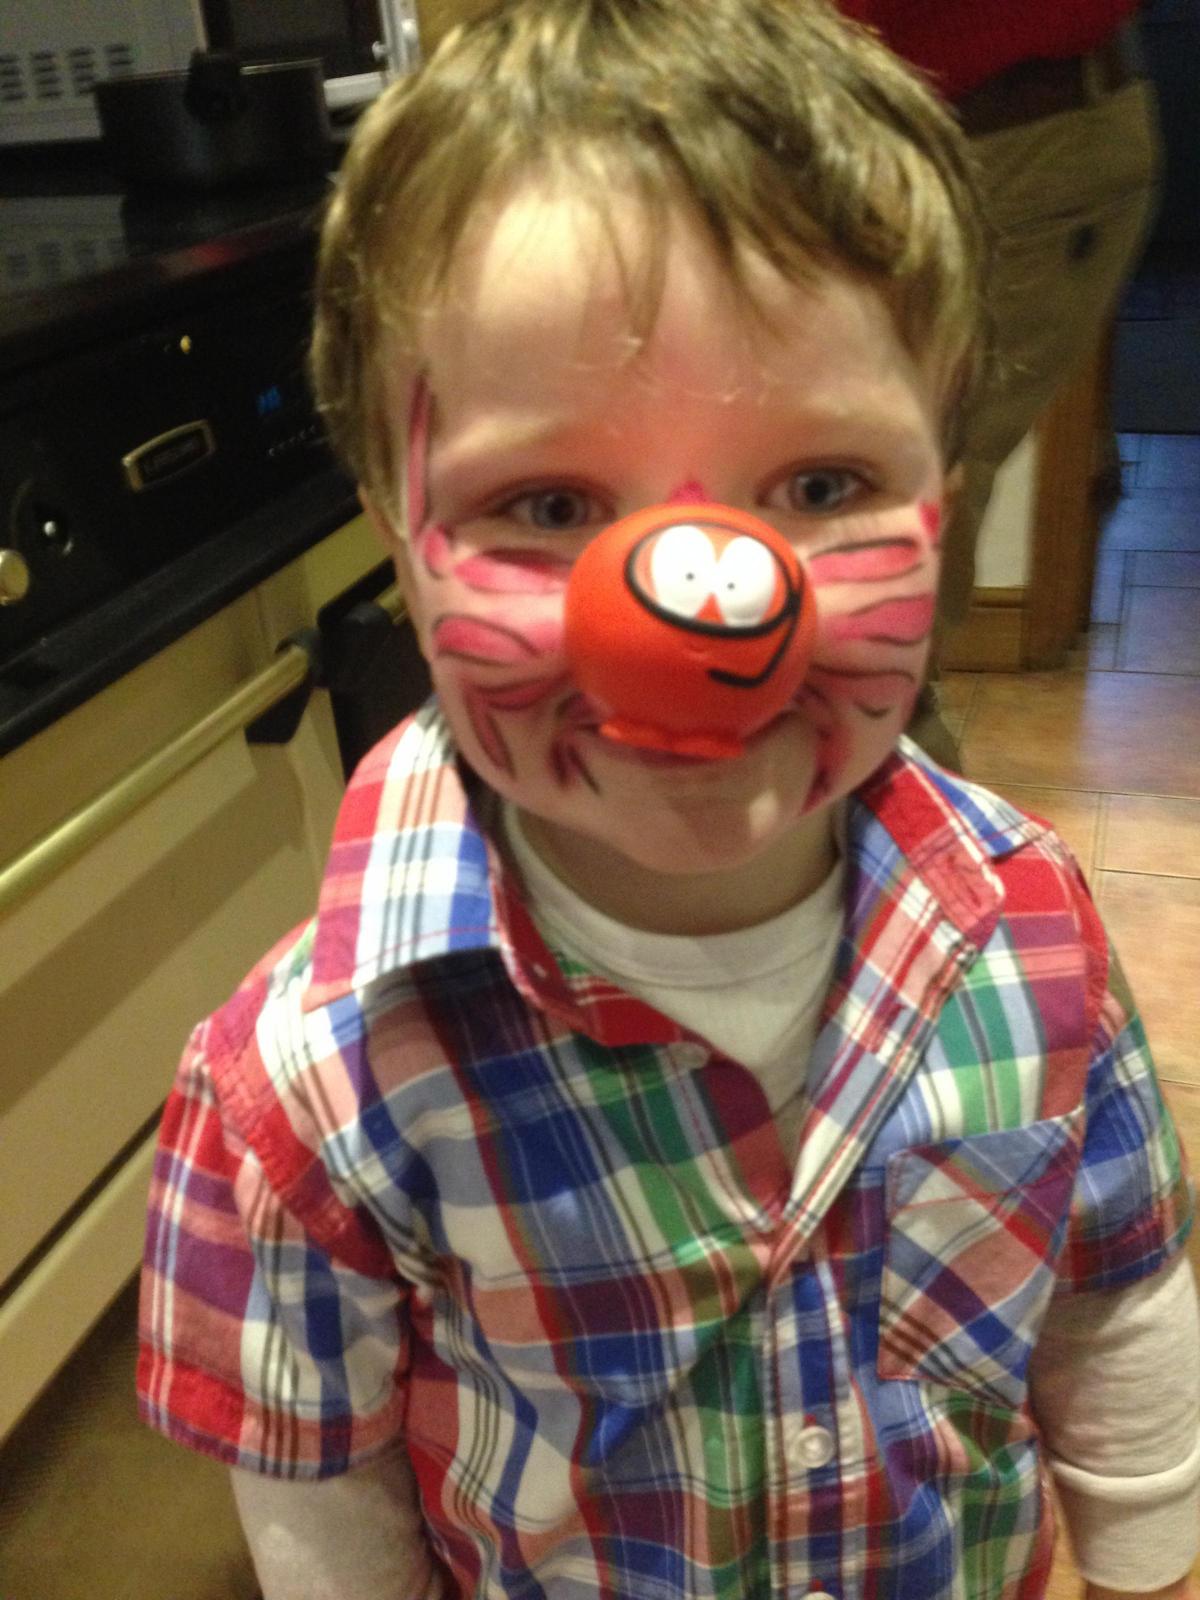 Little Luke O'Regan on his way to Barnabee's Nursery in Kidderminster, with his face painted